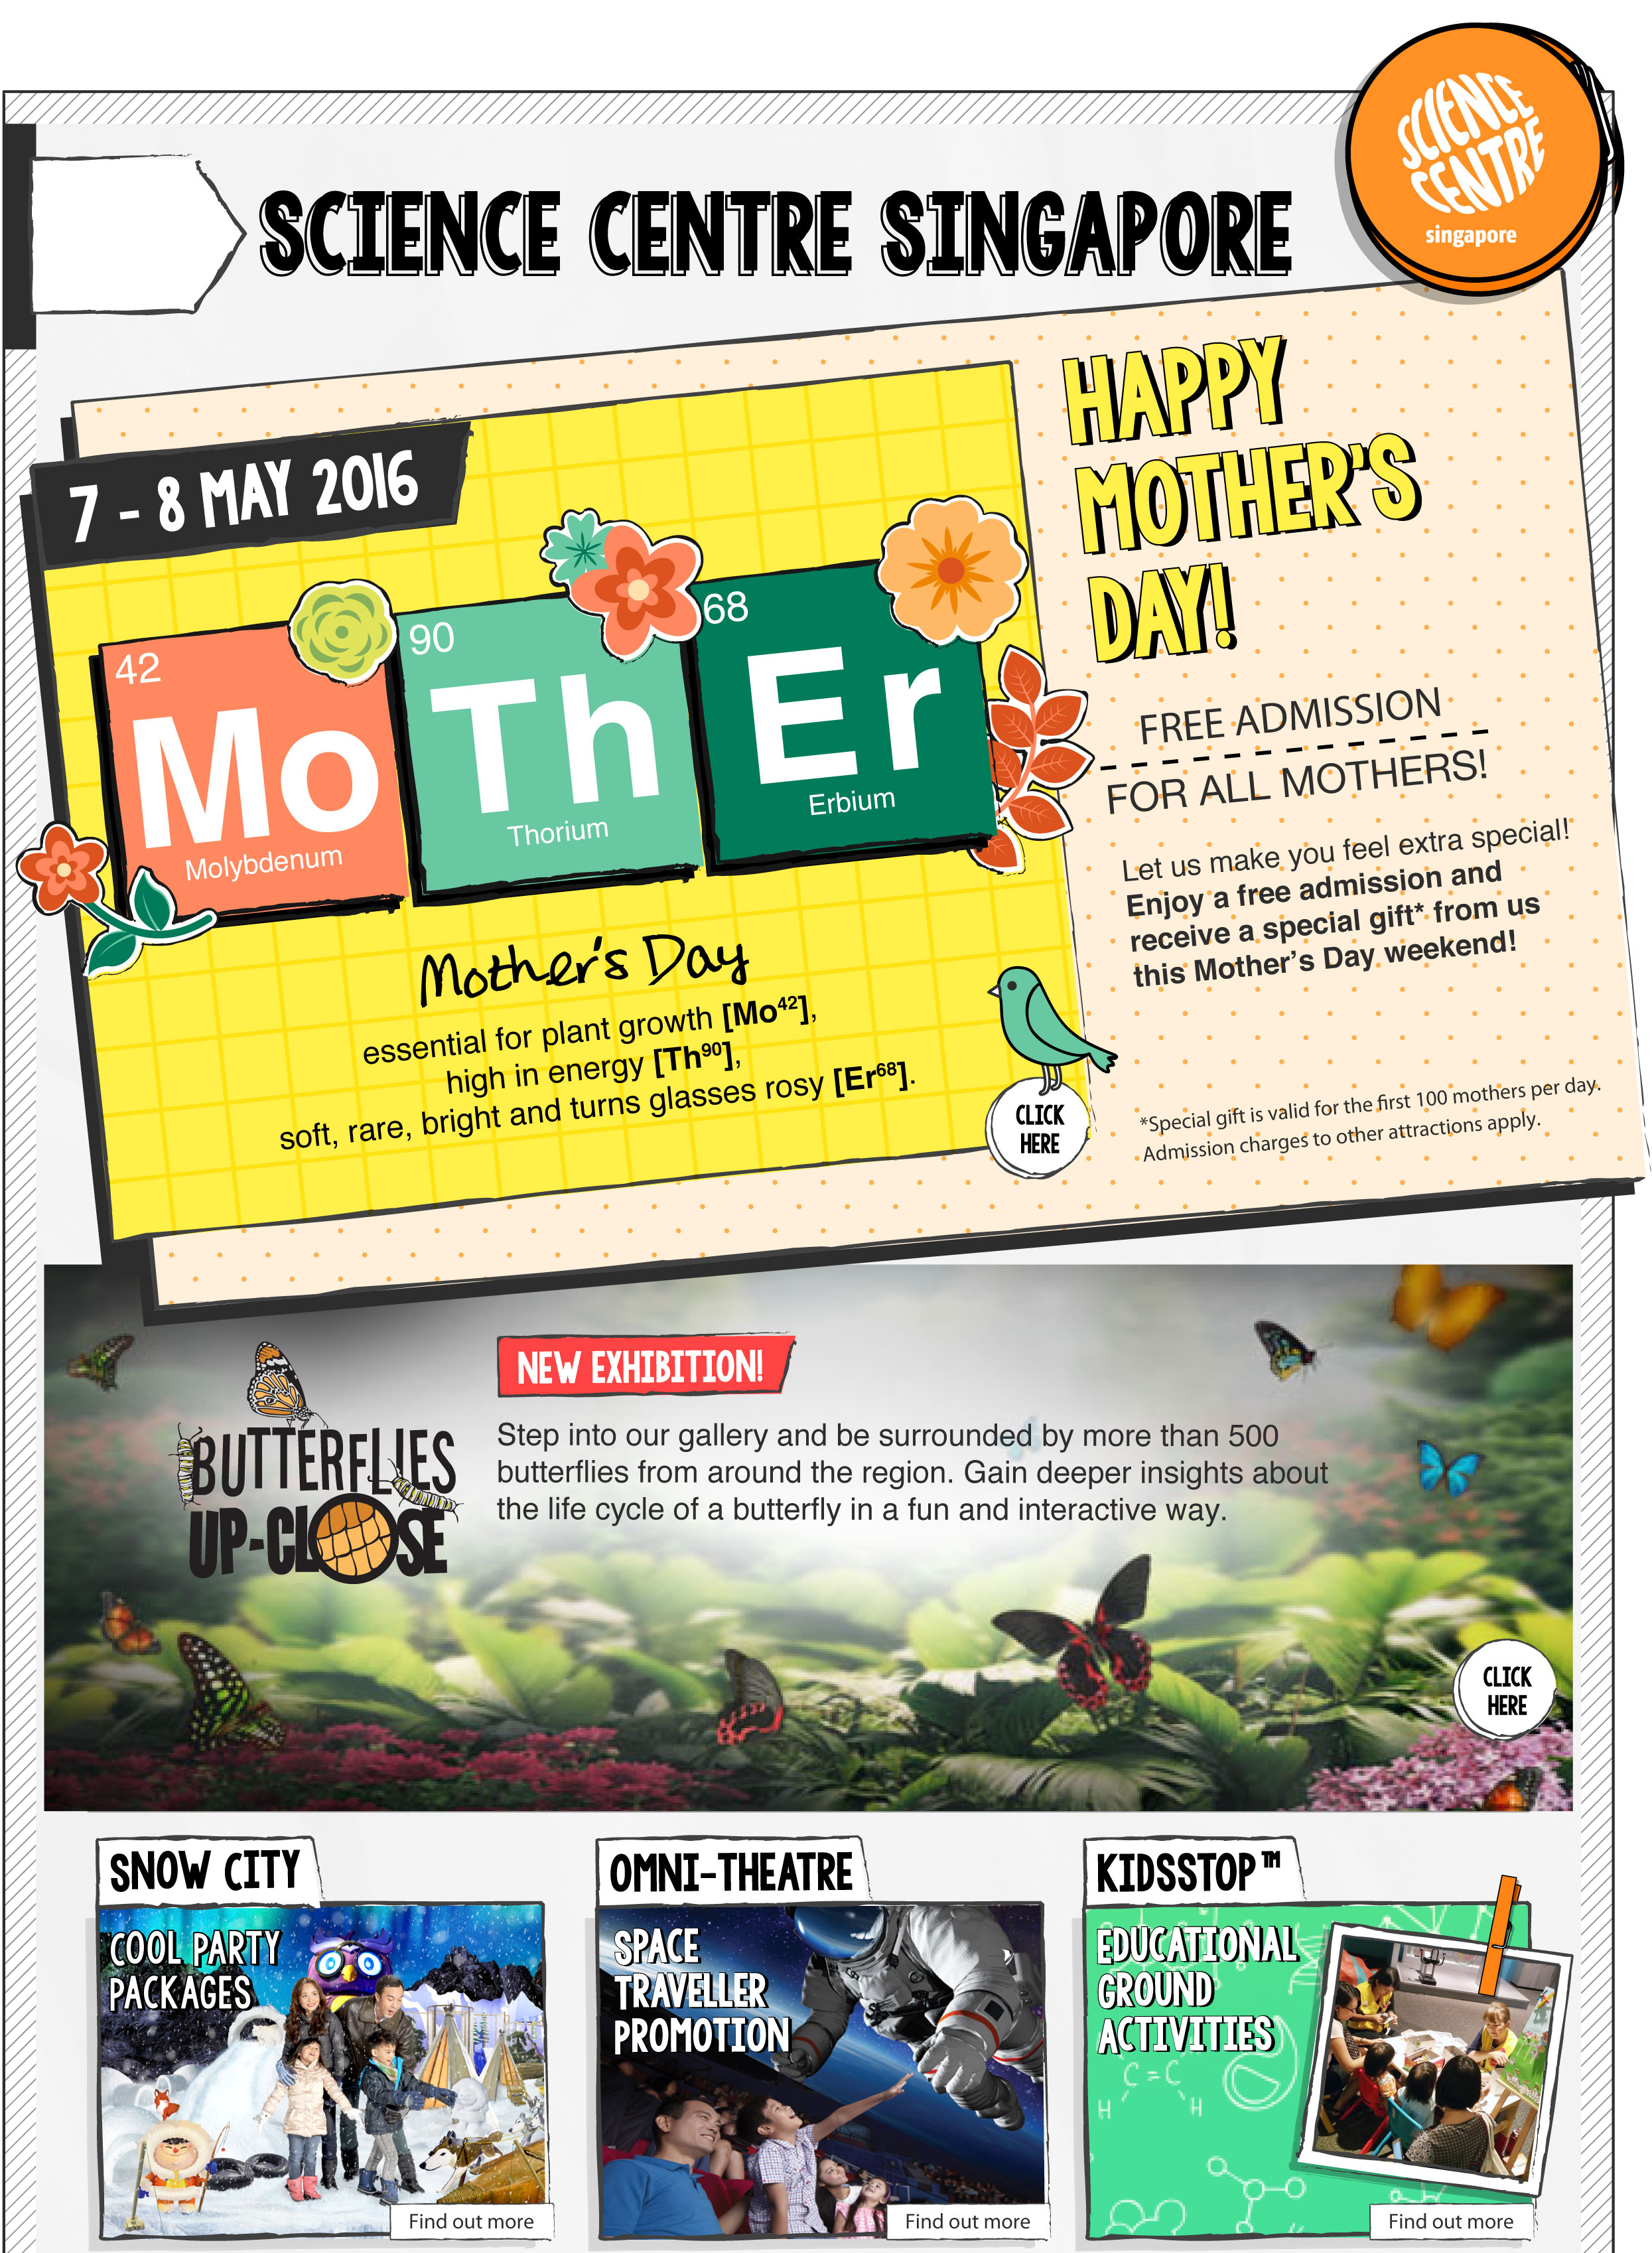 Science Centre Celebrates Mother's Day with Free Admission for all mothers and receive a special gift* this Mother's Day weekend! *First 100 mothers per day.